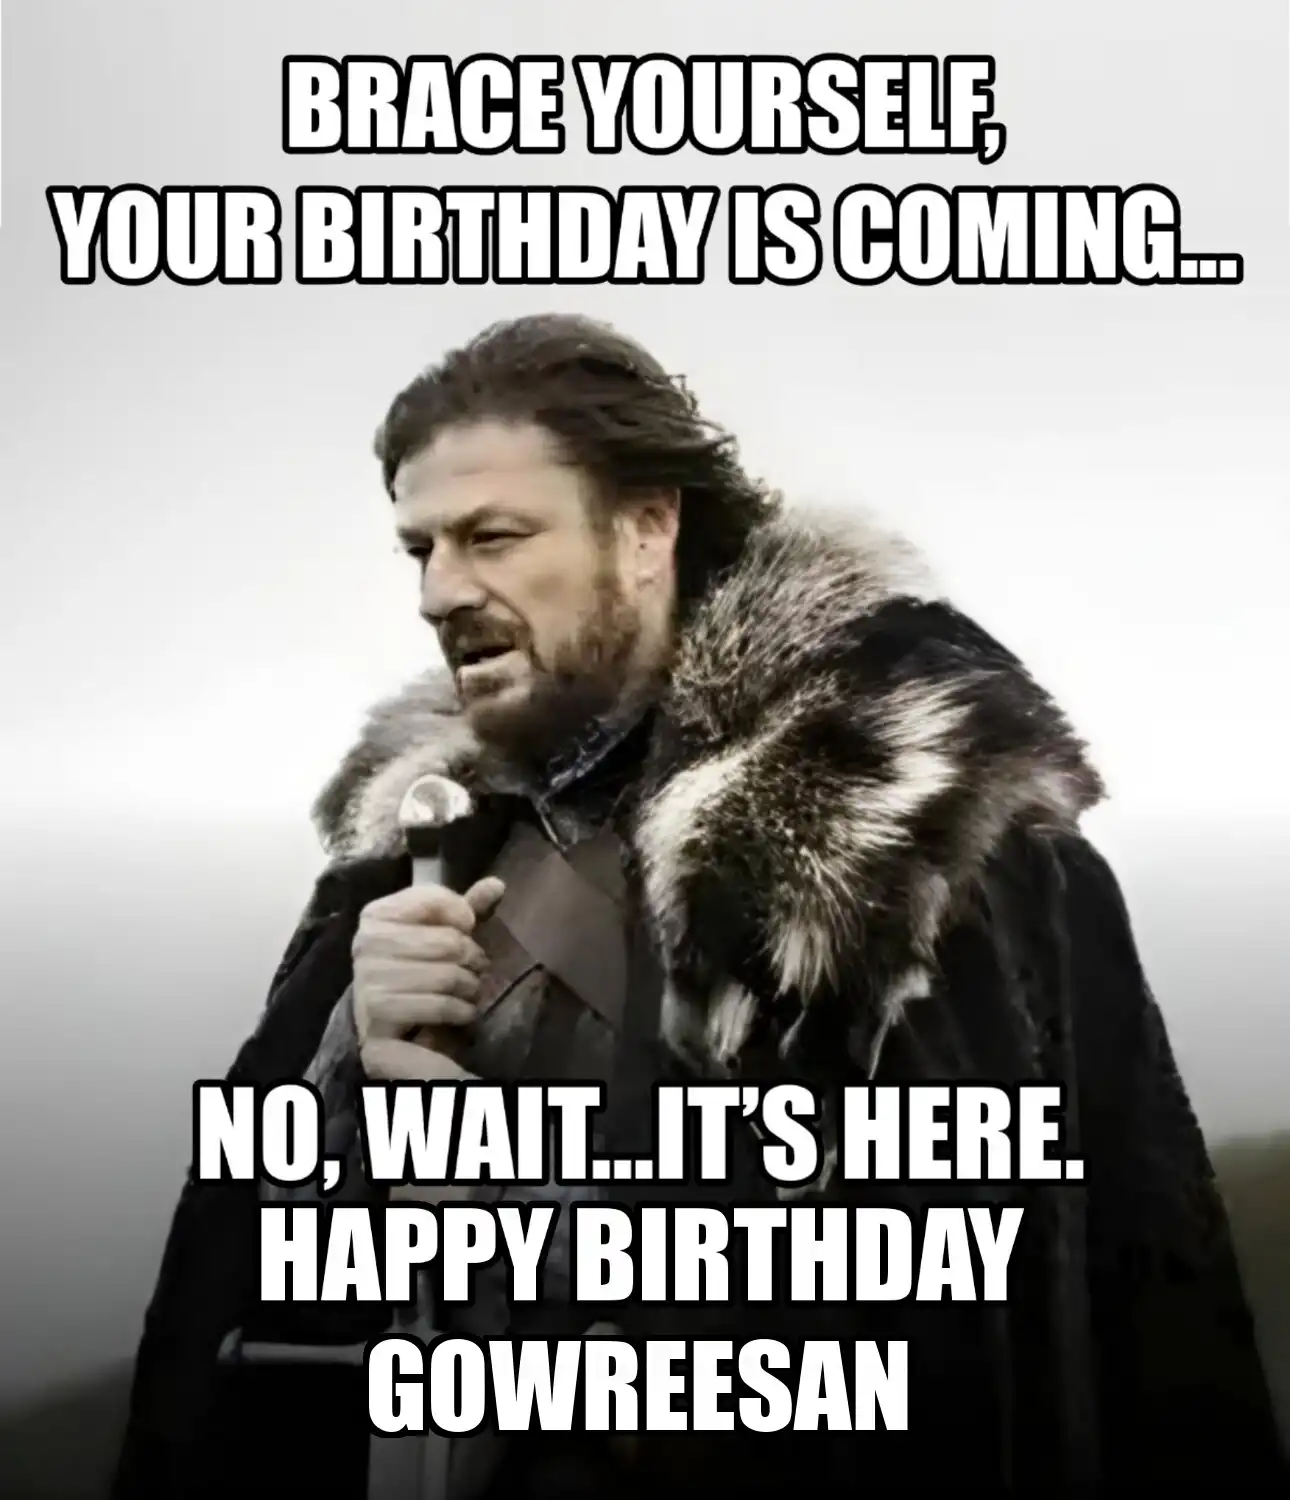 Happy Birthday Gowreesan Brace Yourself Your Birthday Is Coming Meme